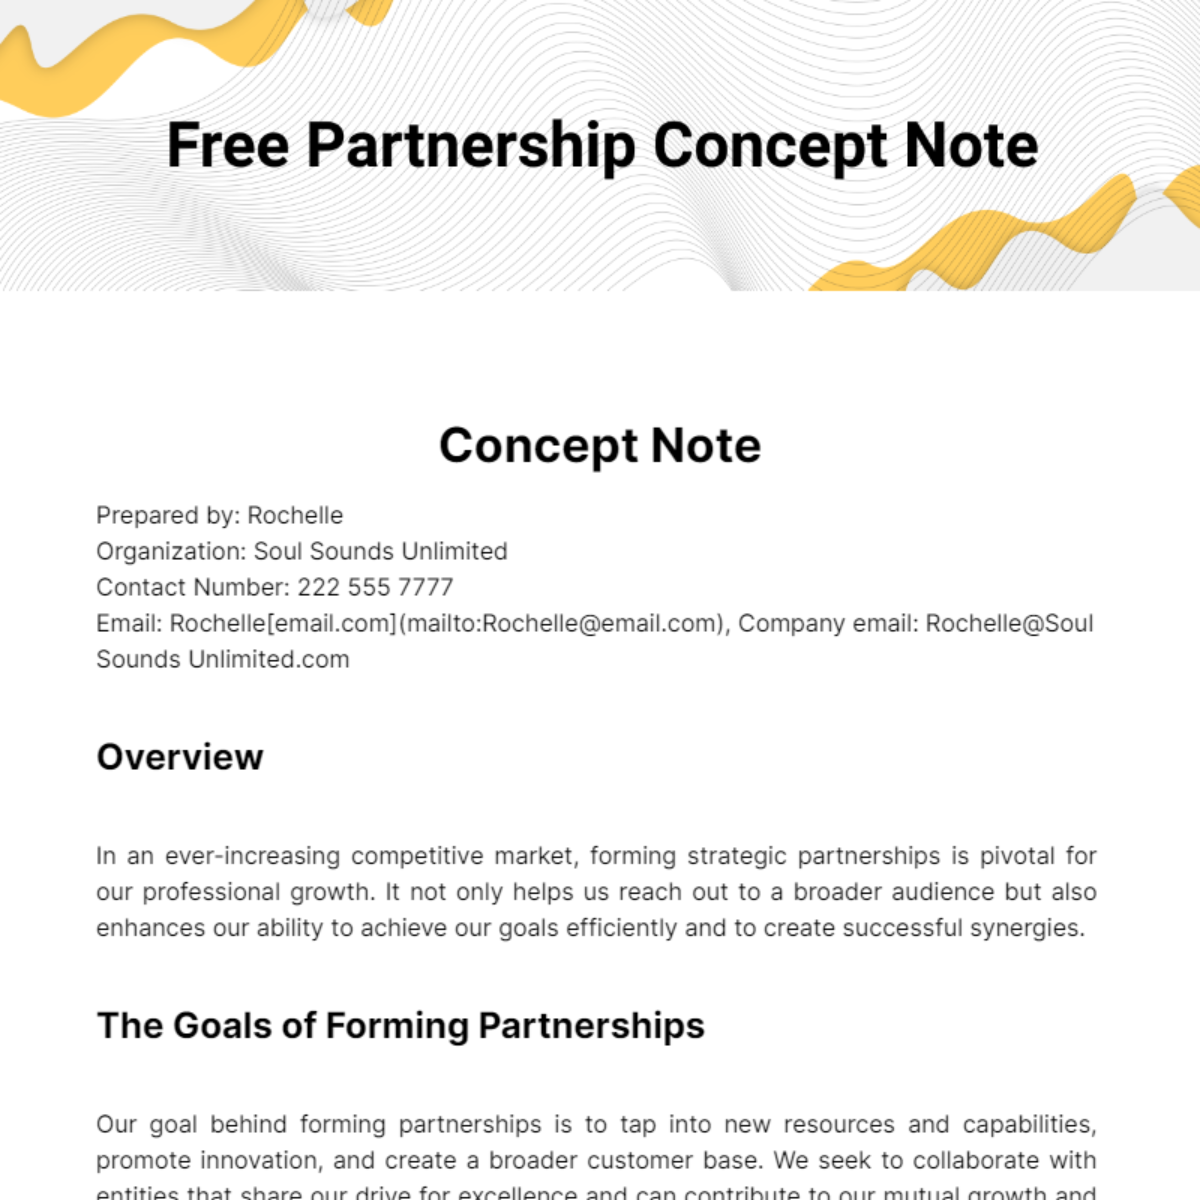 Free Partnership Concept Note Template